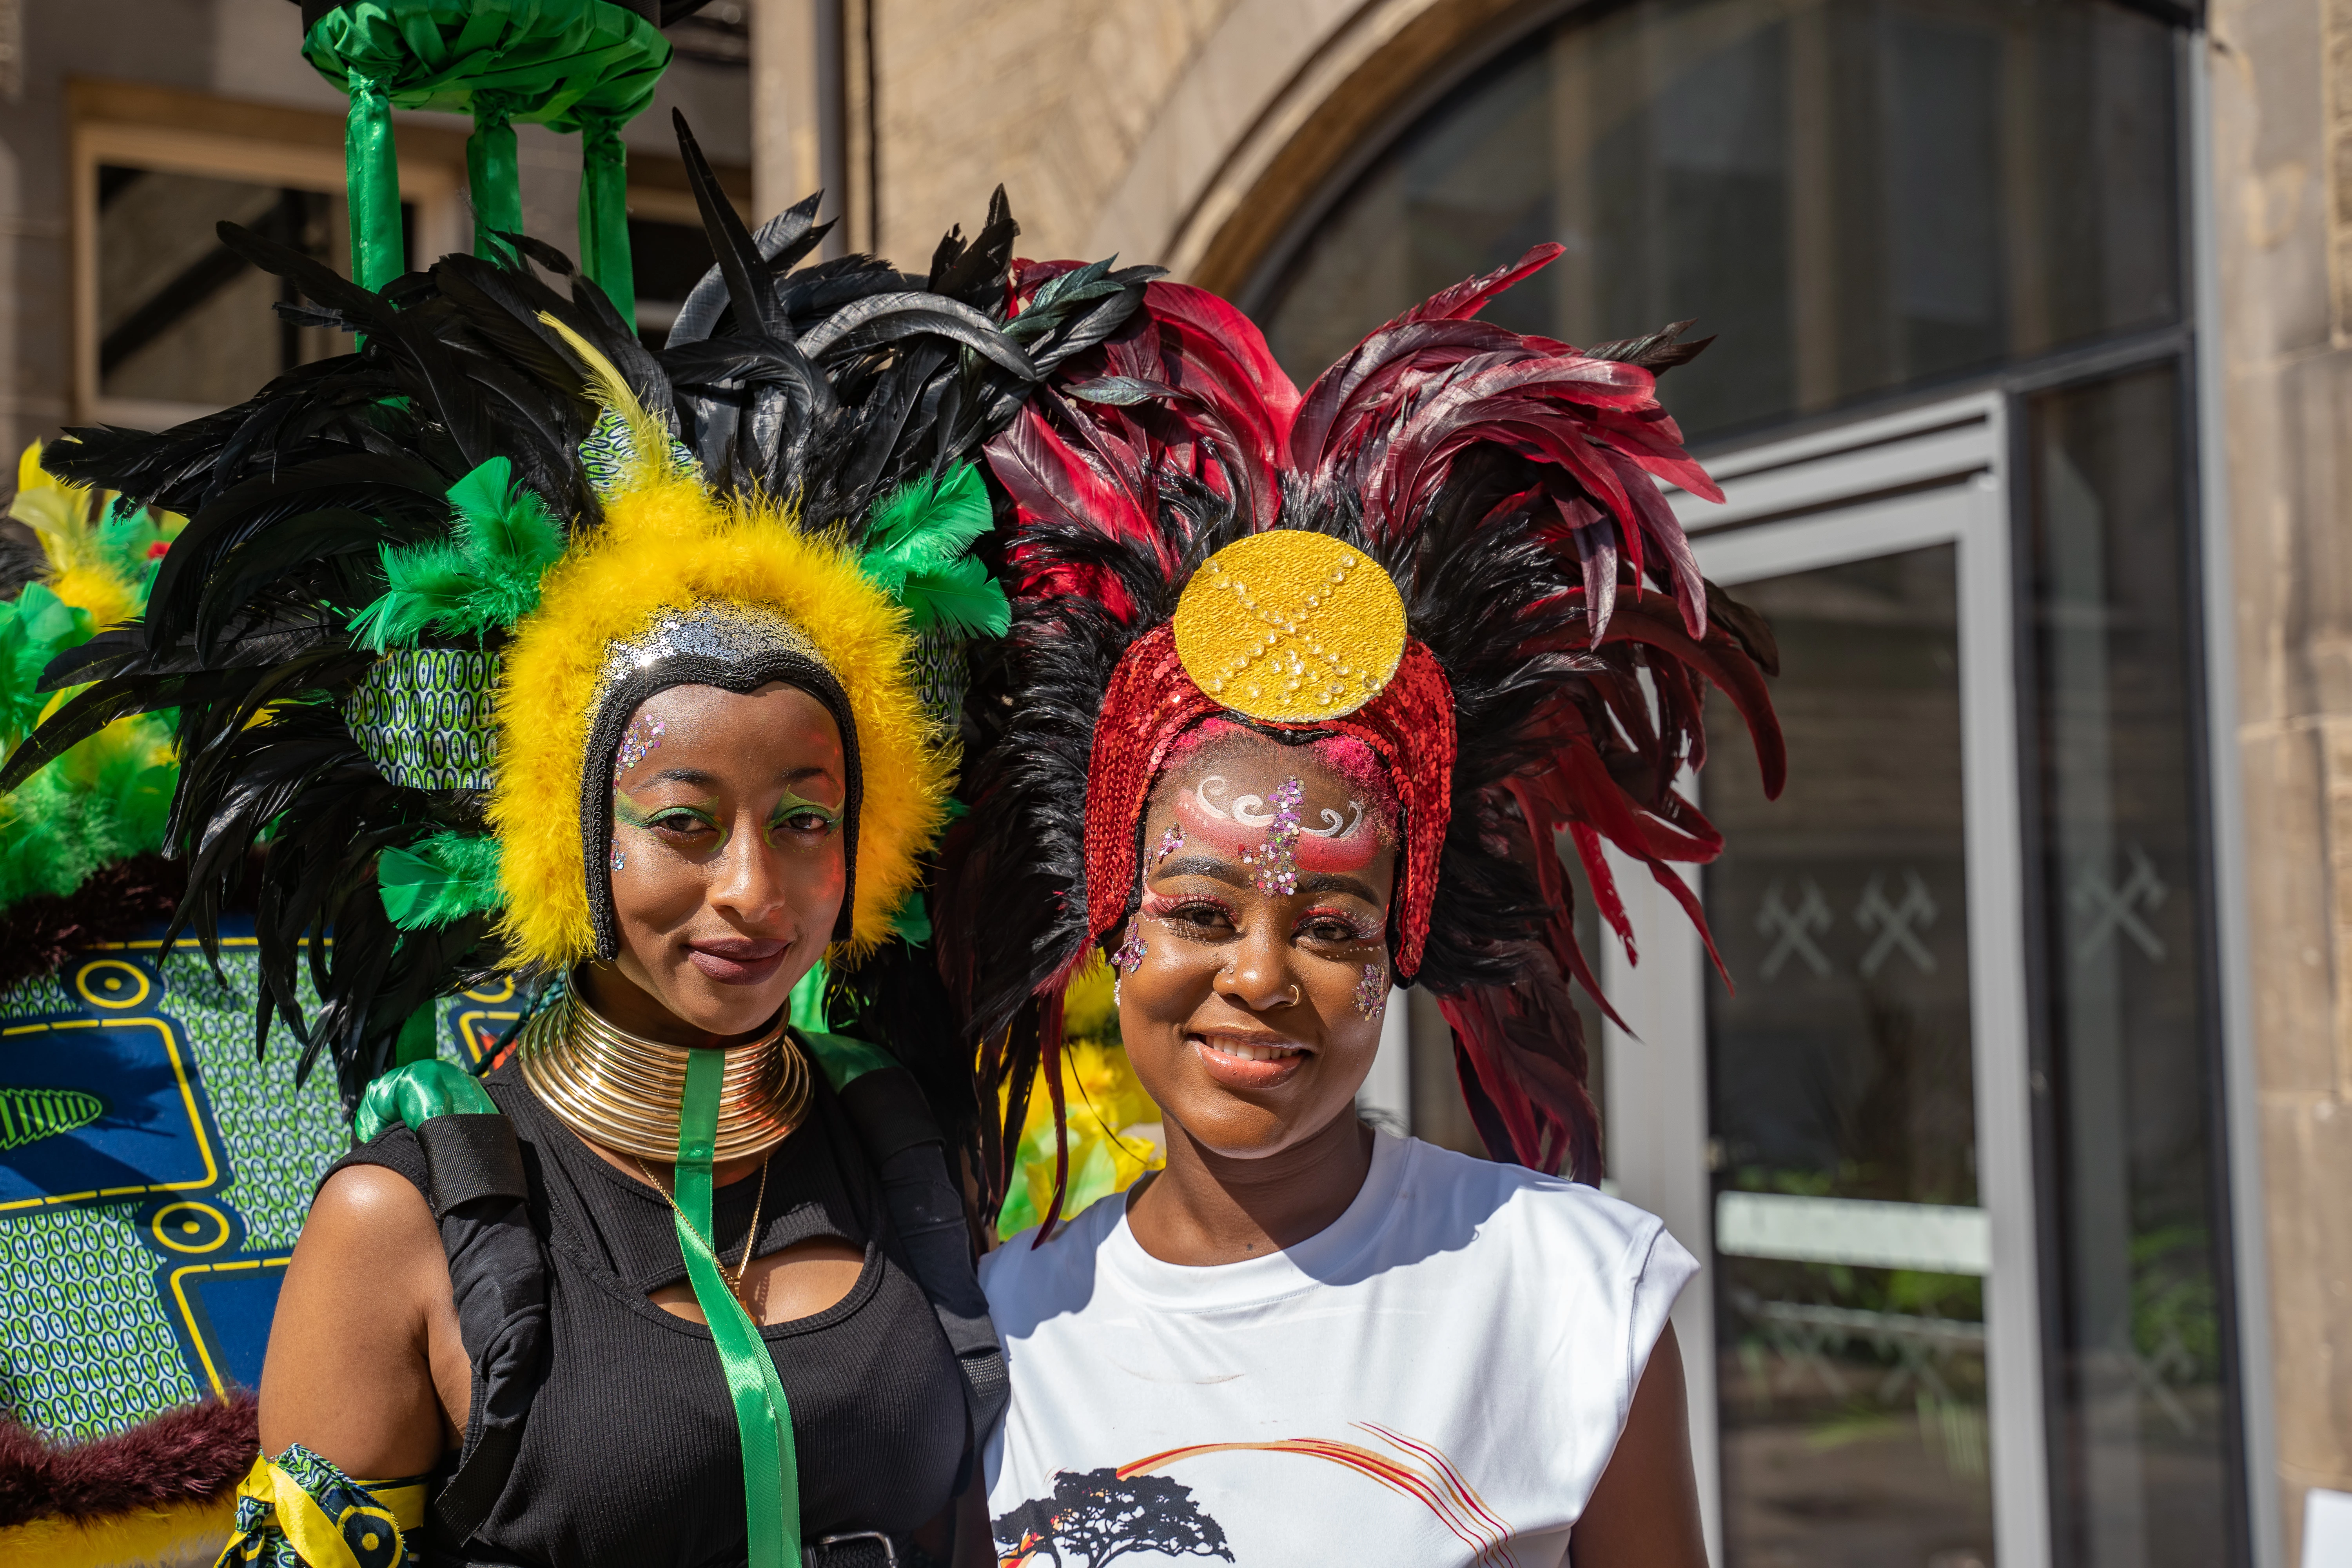 Performers at last year’s Taste of Africa event